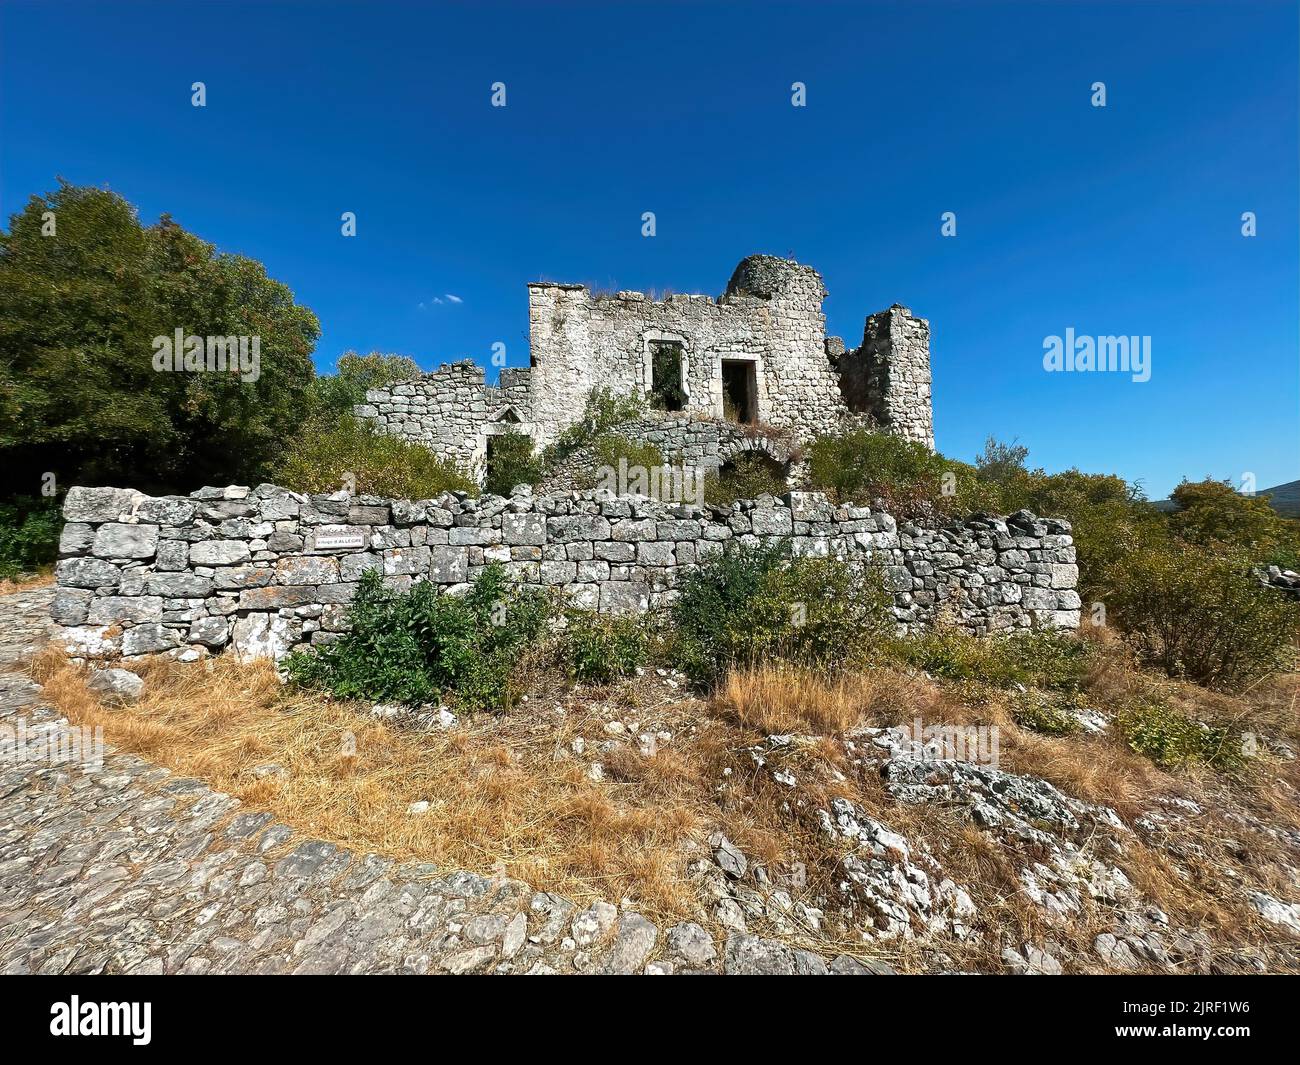 Scenic shot at the ruins of the old medieval Templar vestige, fortress at Allegre les fumades, Gard, France under a blue mediterranean sunny sky Stock Photo